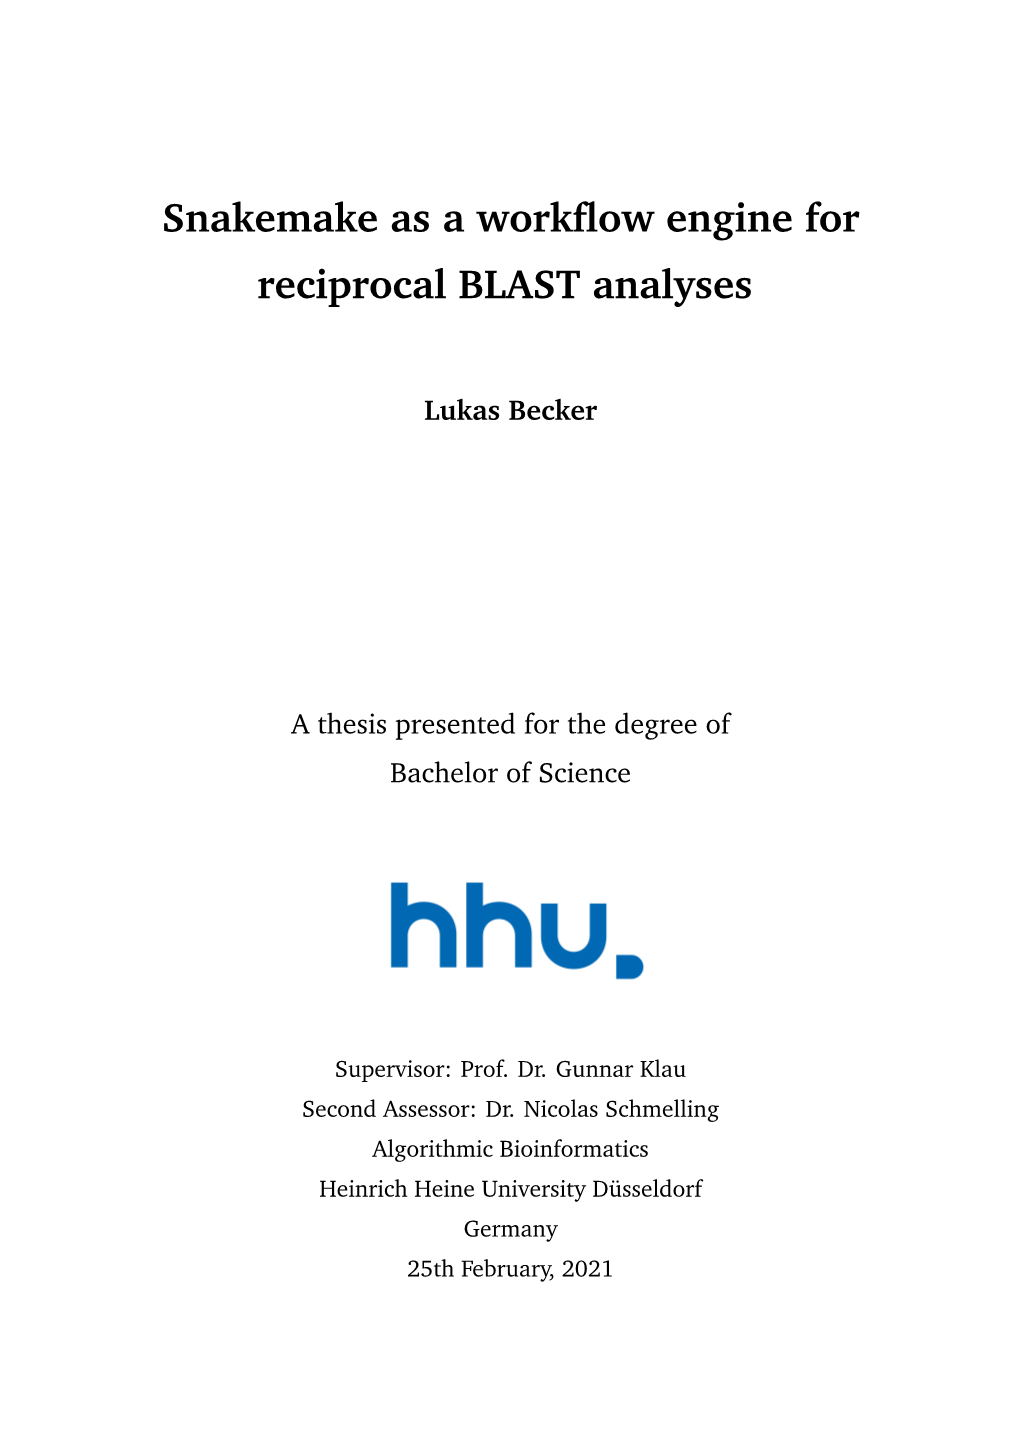 Snakemake As a Workflow Engine for Reciprocal BLAST Analyses